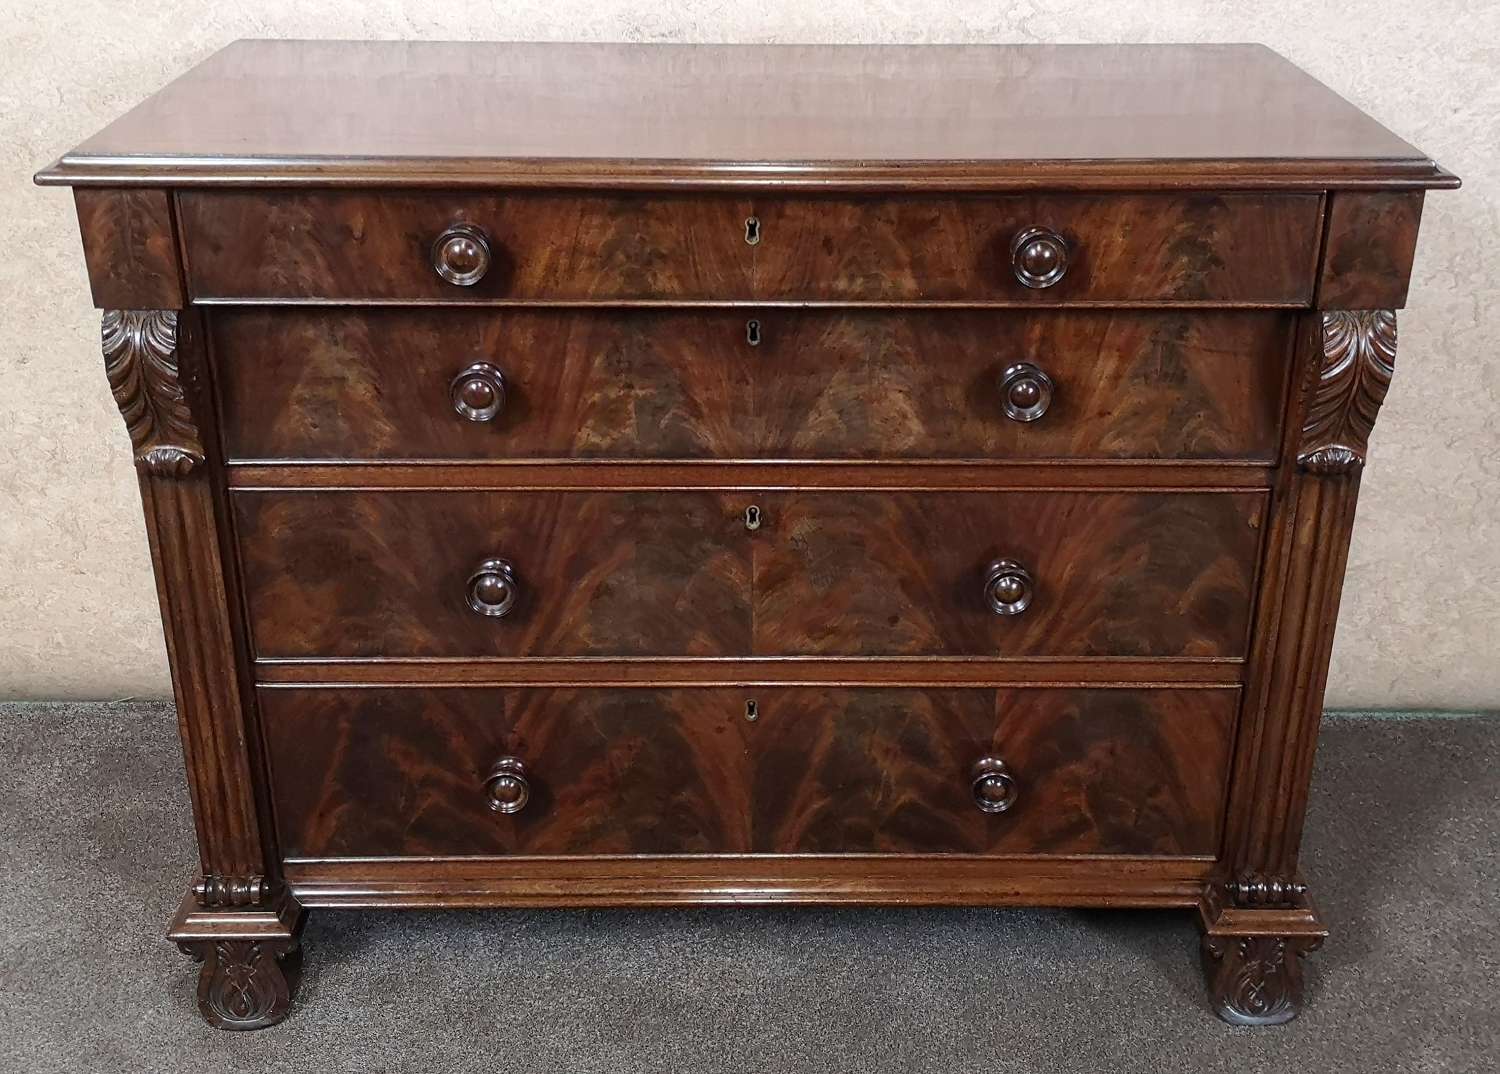 GOOD QUALITY WILLIAM IV FIGURED MAHOGANY CHEST OF DRAWERS